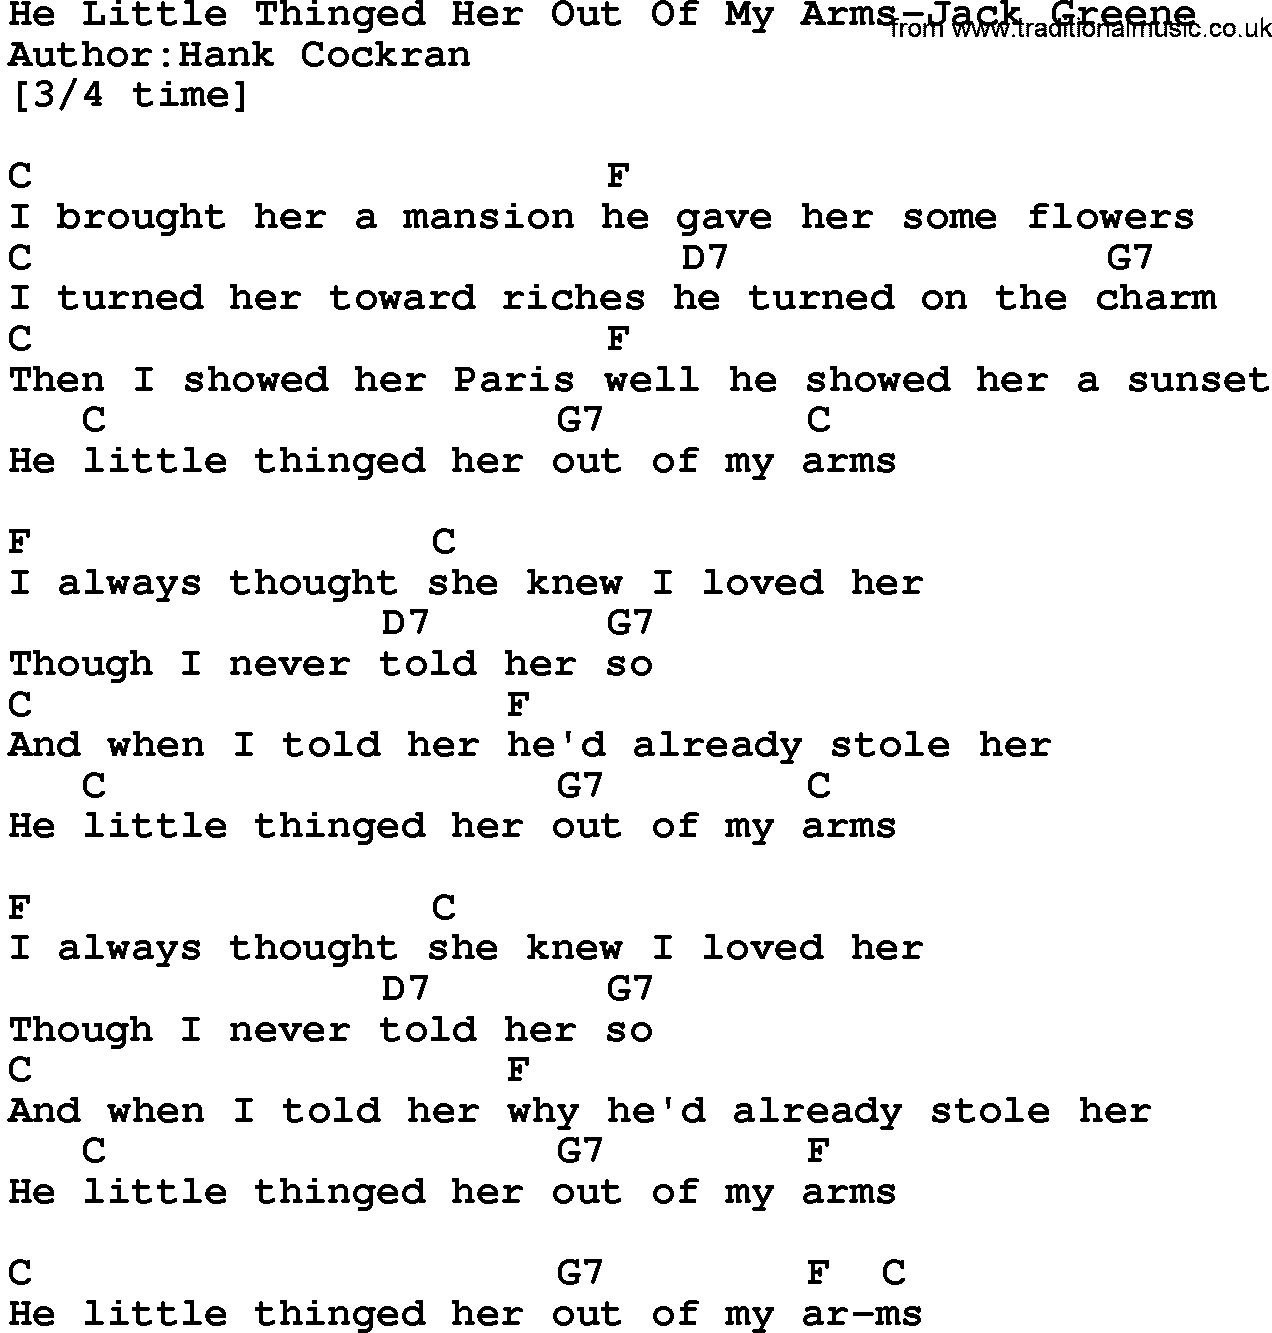 Country music song: He Little Thinged Her Out Of My Arms-Jack Greene lyrics and chords